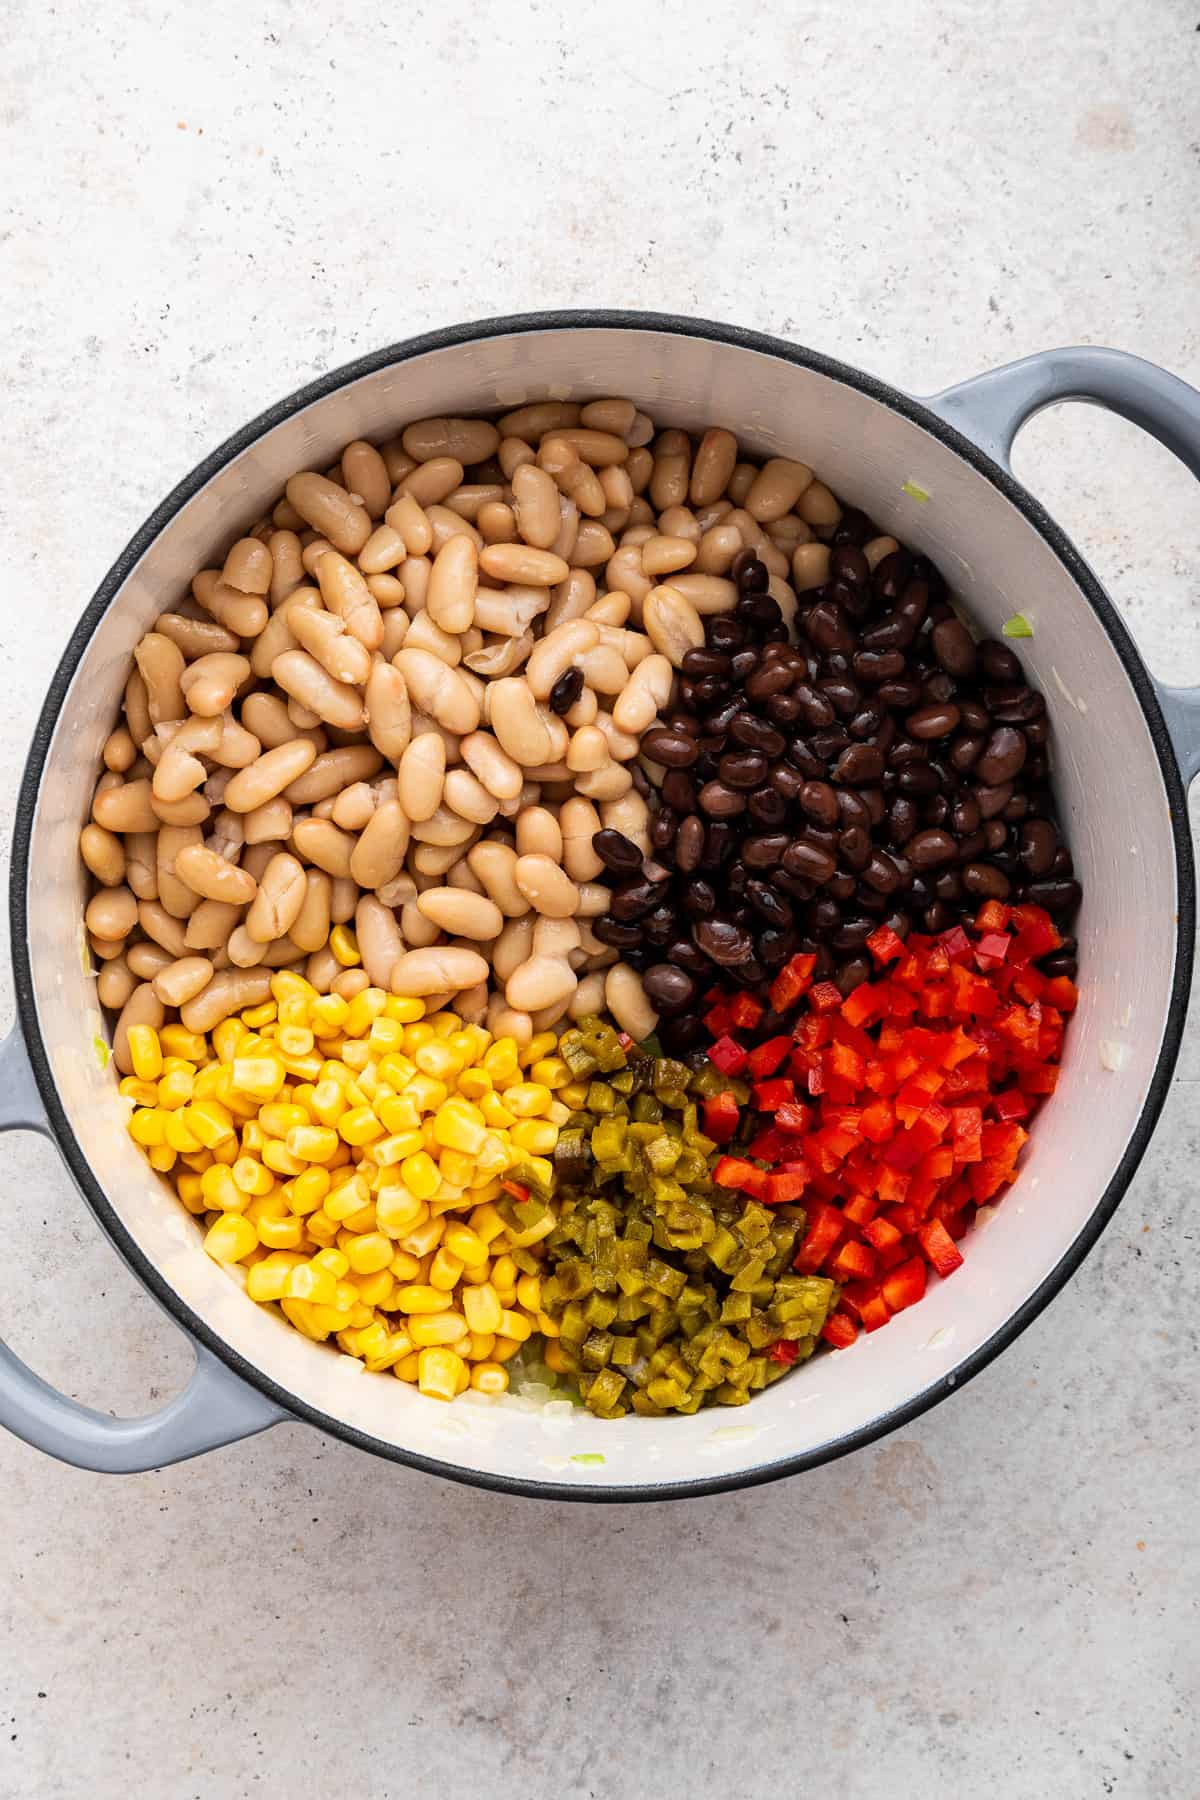 Five ingredients in the pot: black beans, corn, white beans, green chilis and red pepper dice.